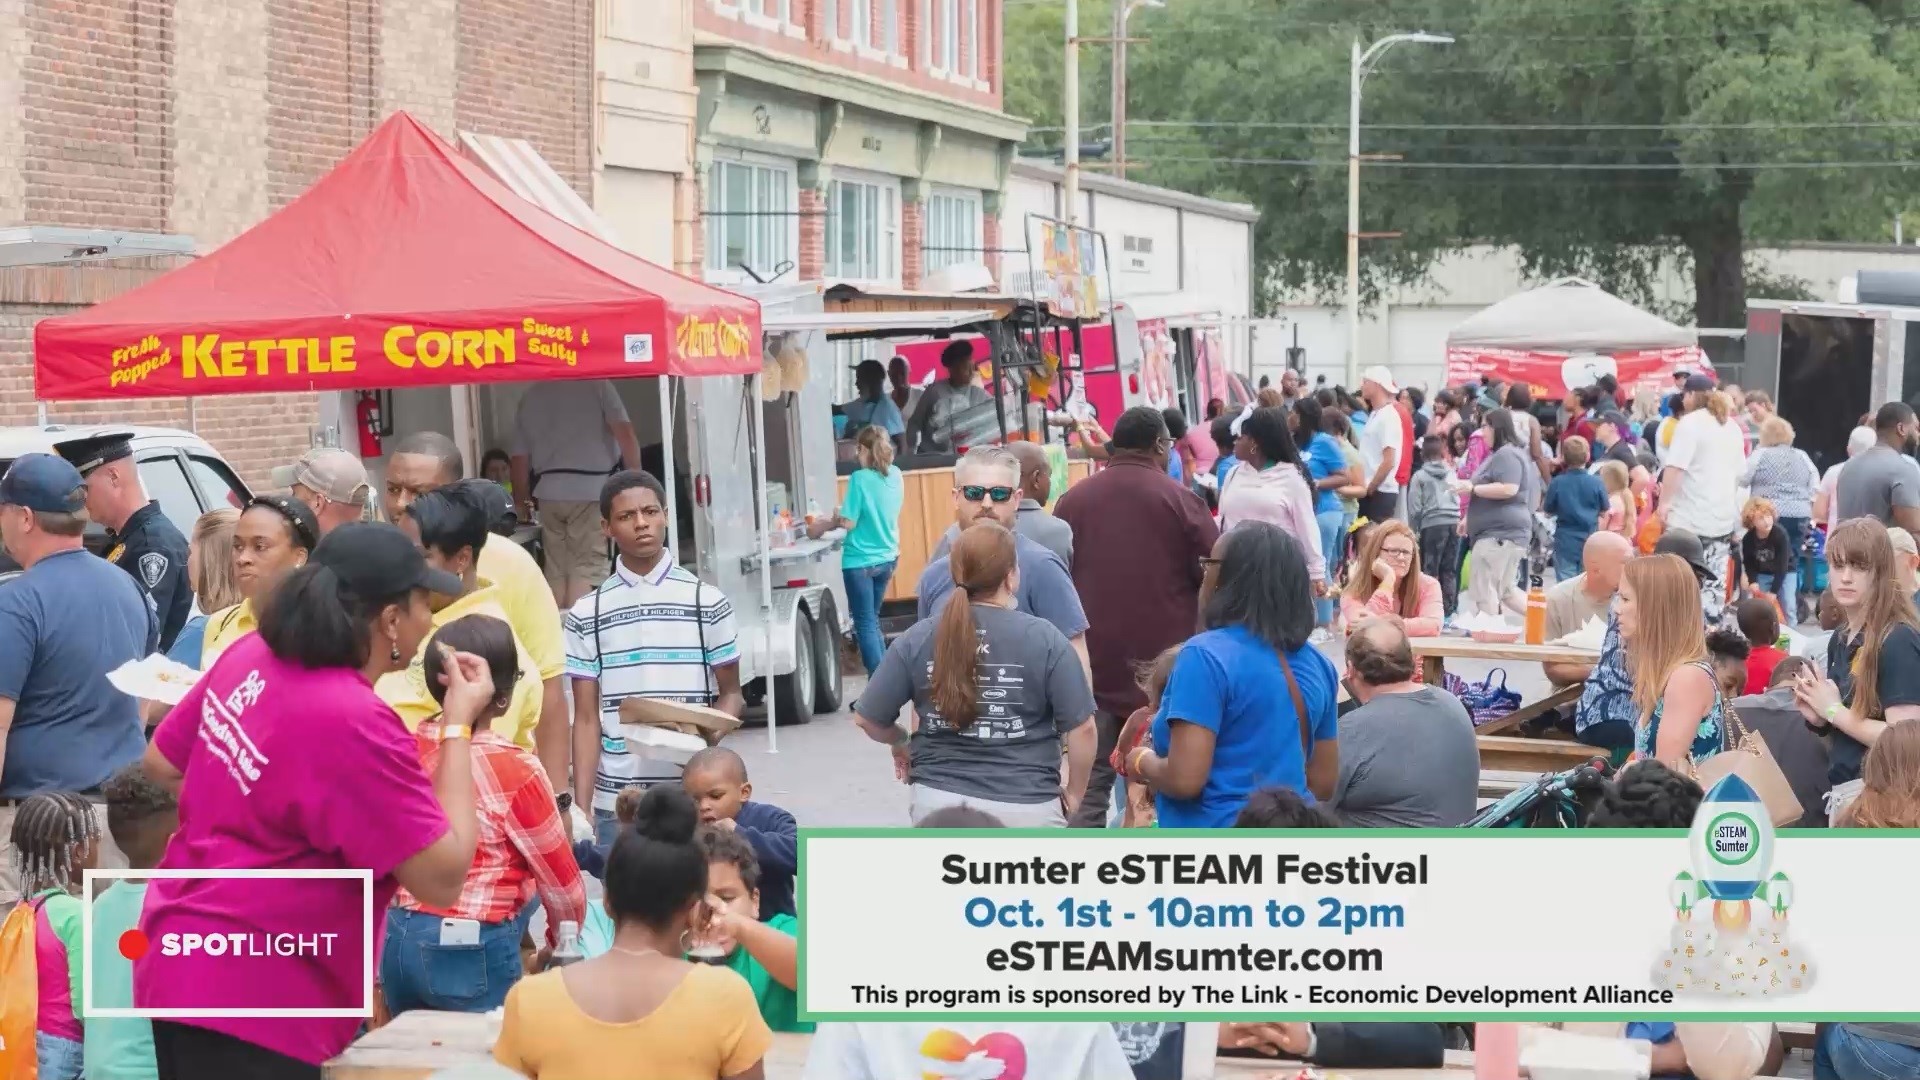 Join TheLINK Economic Development Alliance for the eSTEAM Sumter Festival on Saturday, October 1 from 10am-2pm.